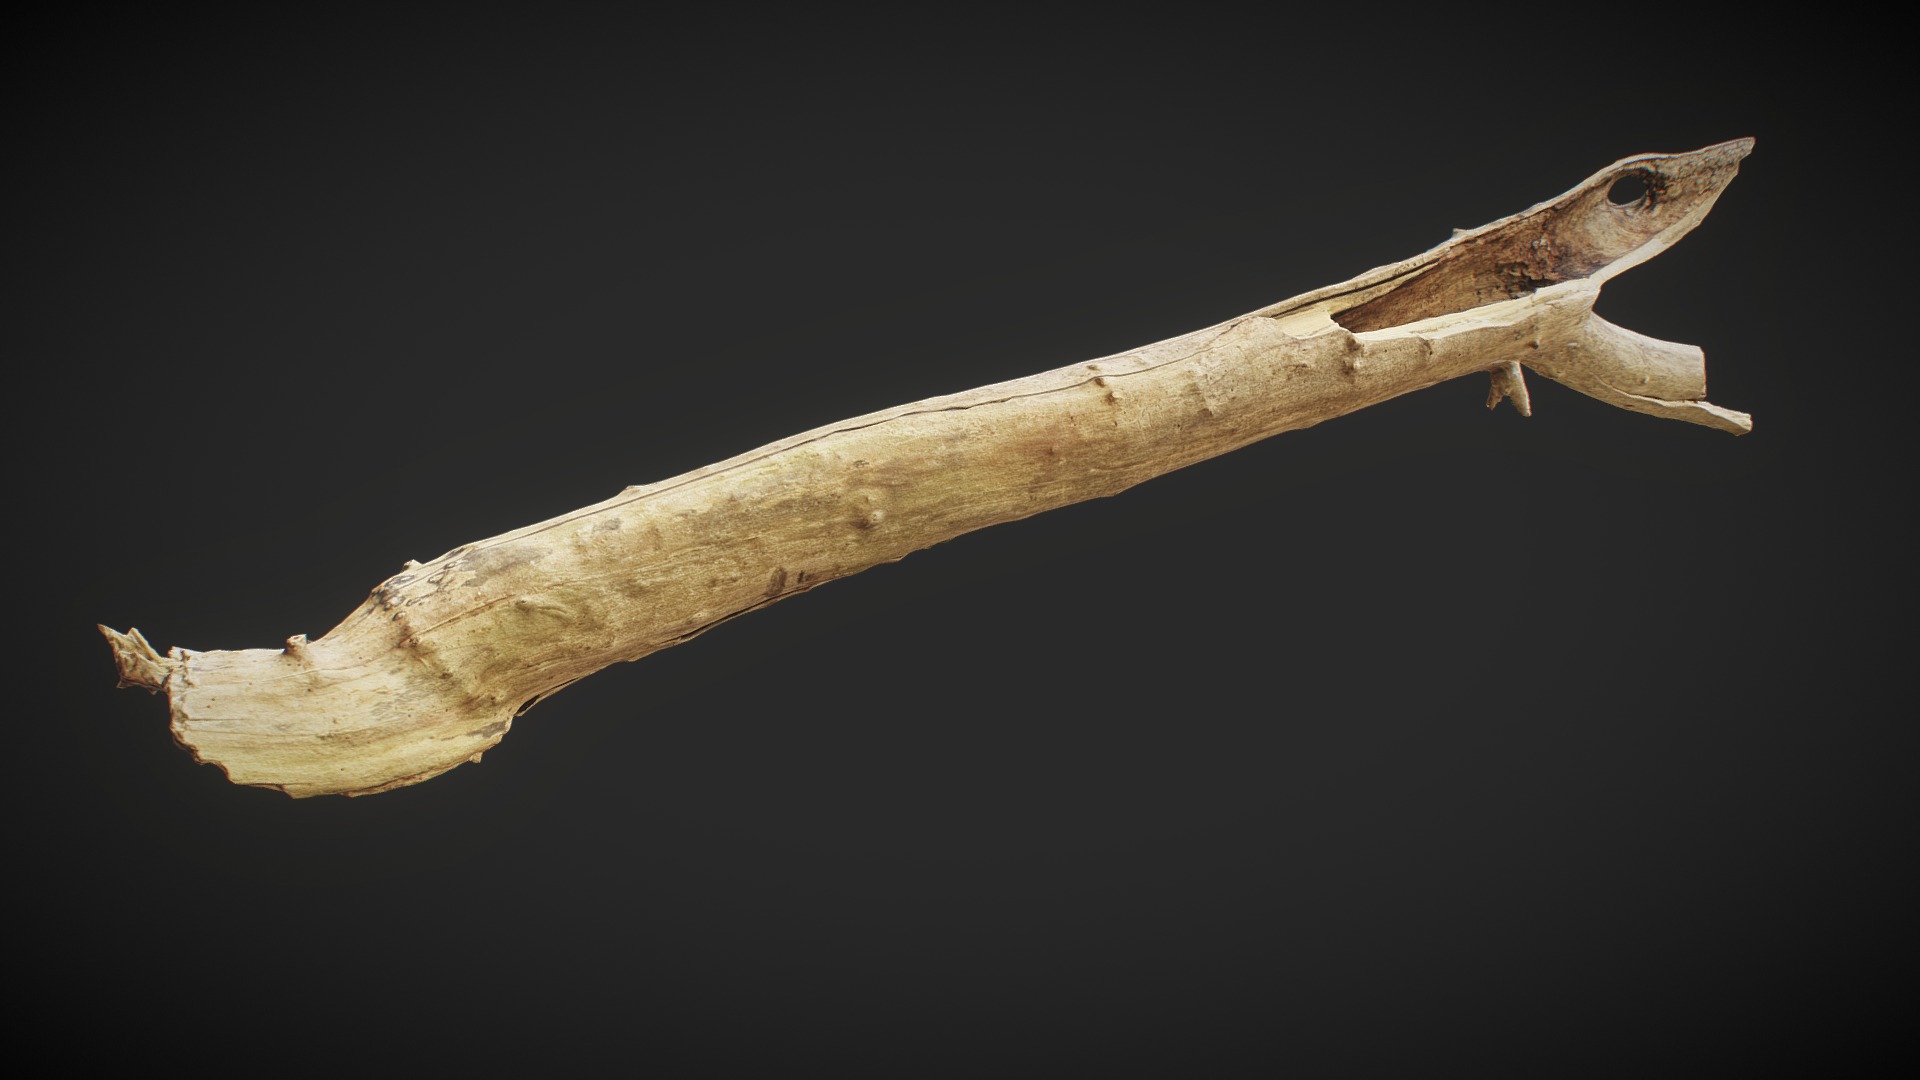 3D model Barkless-wood 01 free - This is a 3D model of the Barkless-wood 01 free. The 3D model is about a lizard with a long tail.